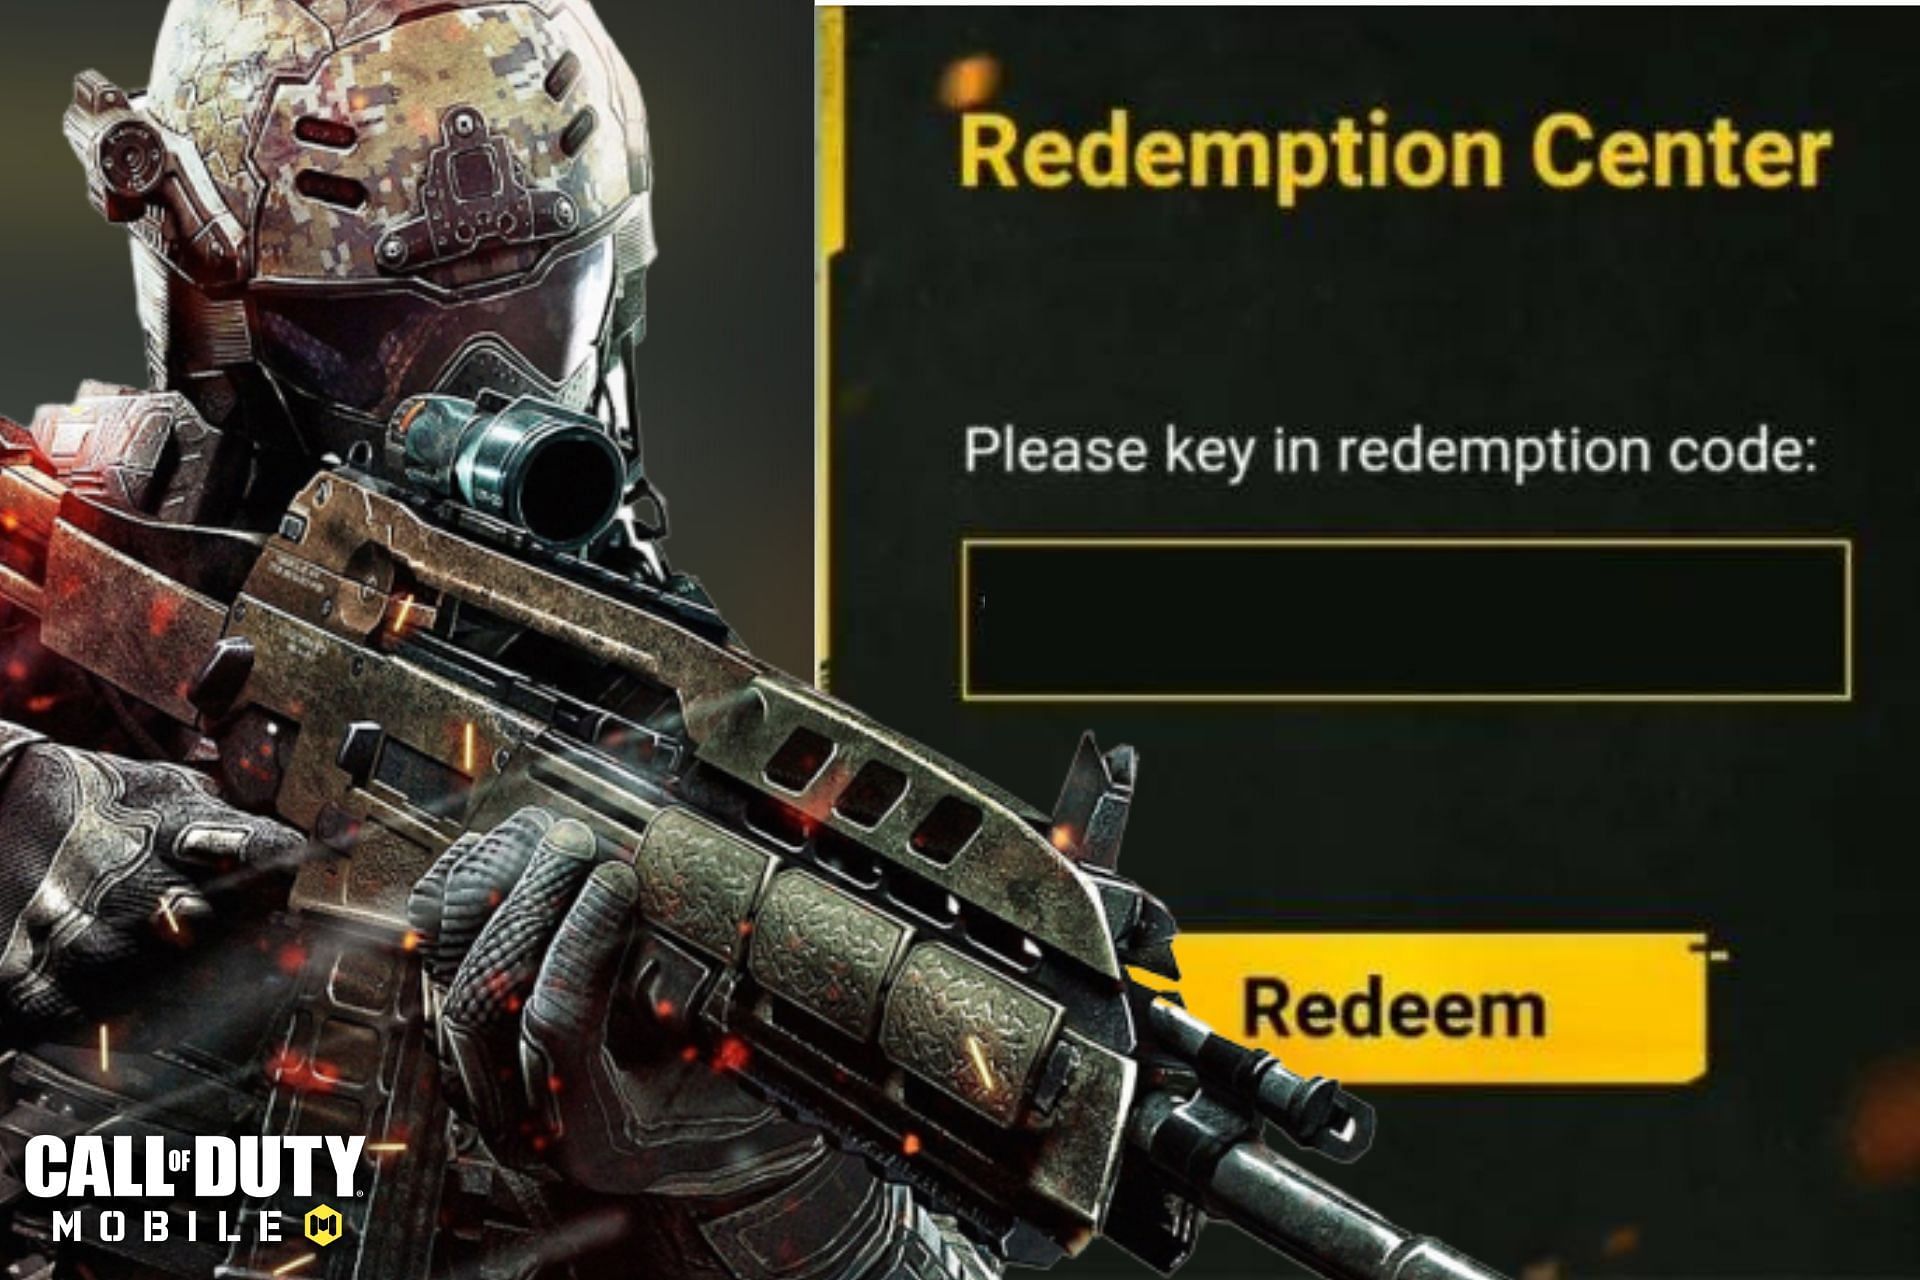 REDEMPTION CENTER - Call of Duty Mobile